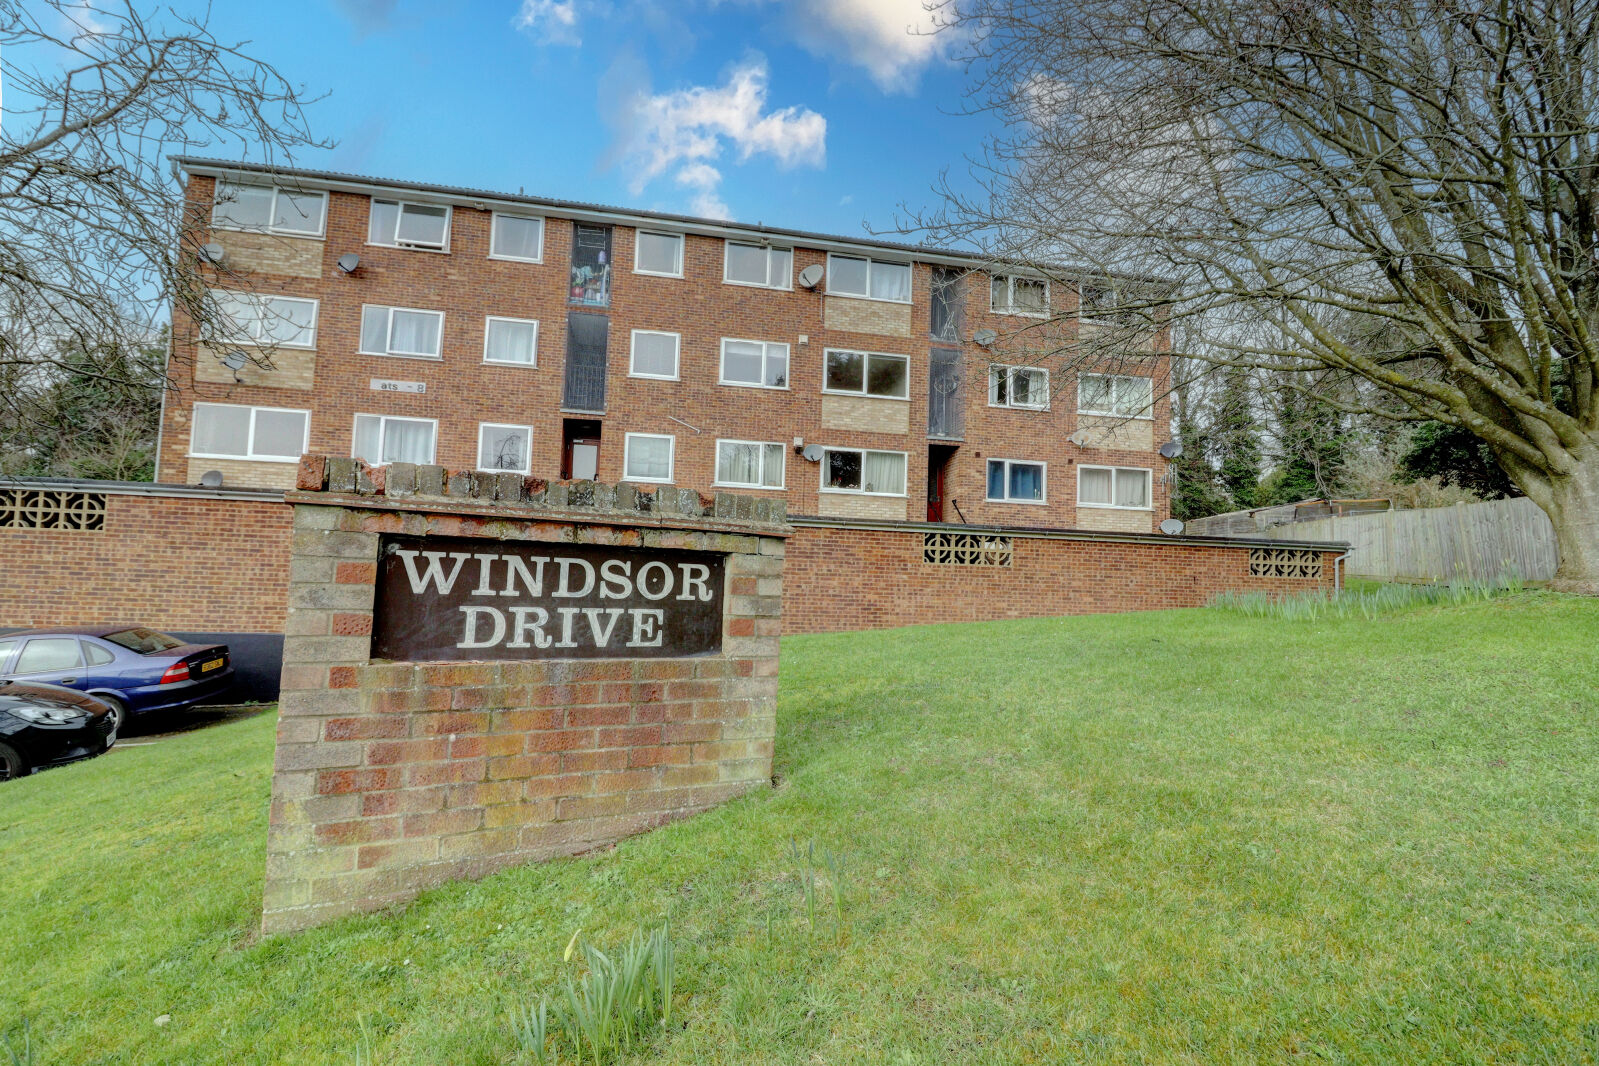 2 bedroom  flat for sale Windsor Drive, High Wycombe, HP13, main image